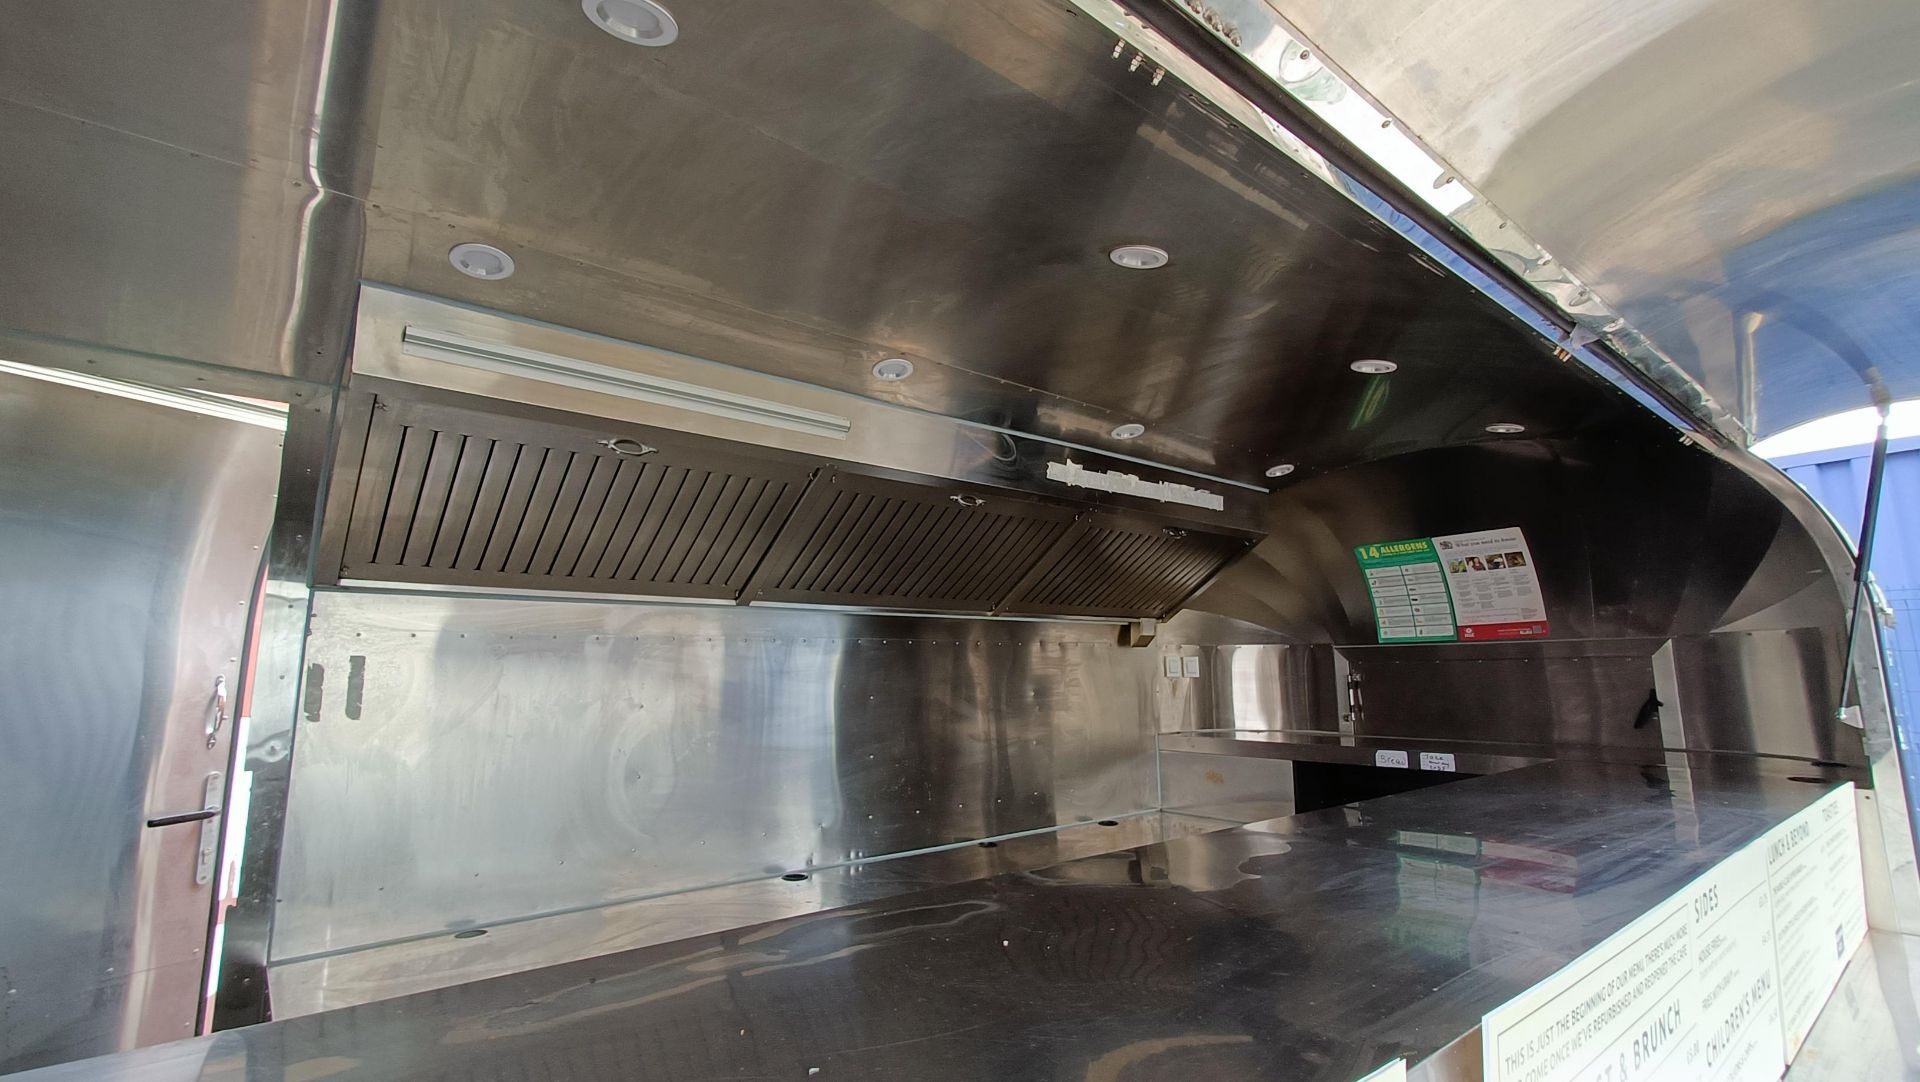 2022 Airstream type Catering trailer - Image 15 of 33